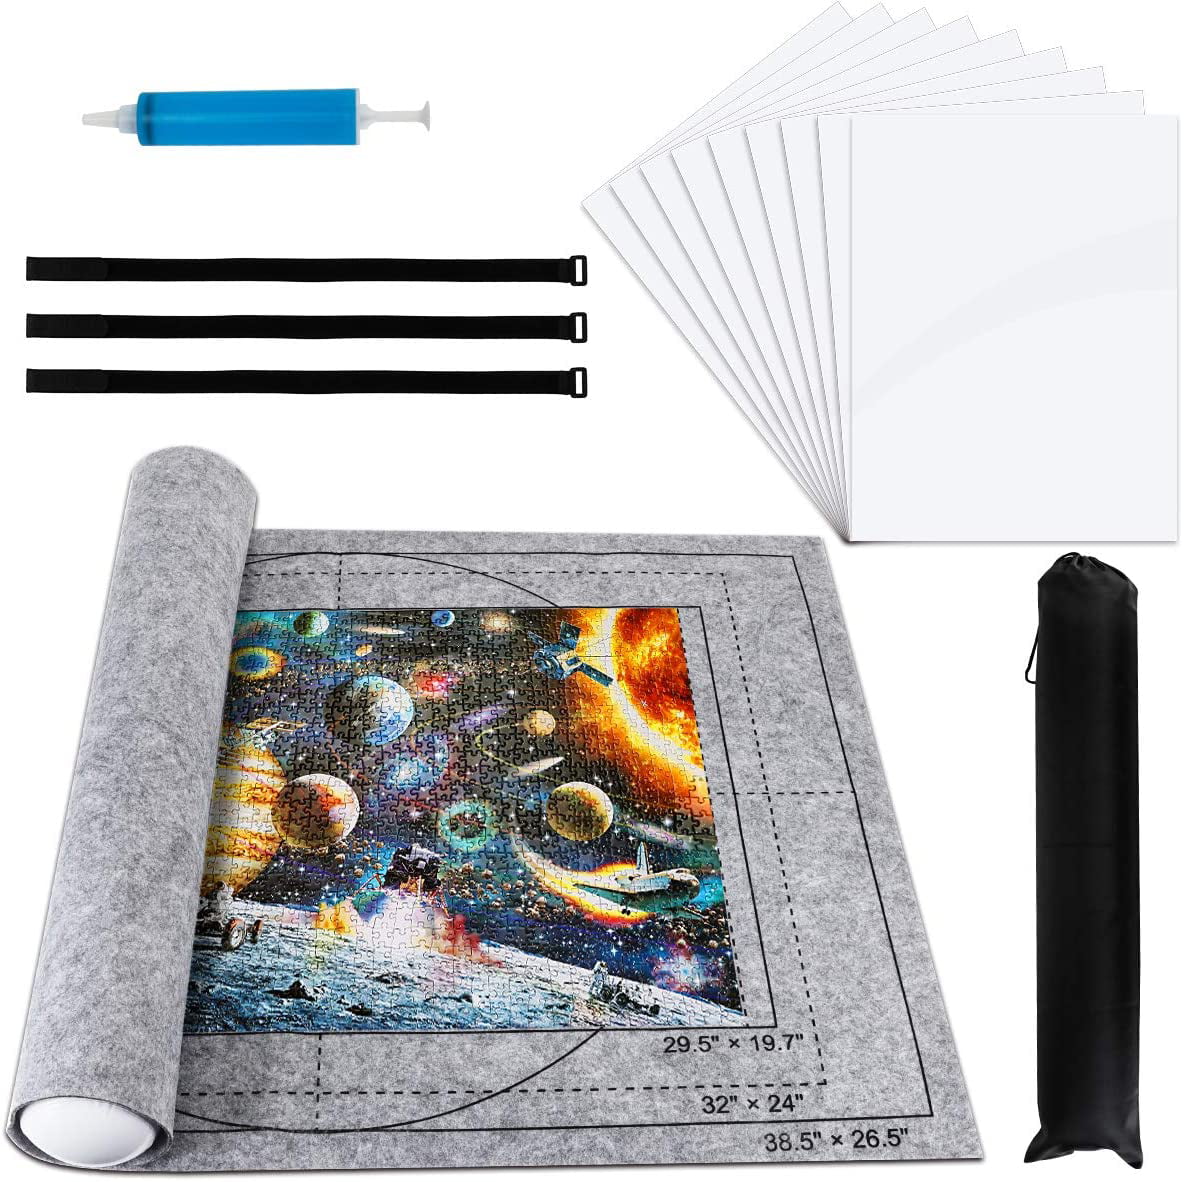 Jigsaw Mat Jigsaw Puzzle Roll Mat Puzzle Storage Mat Roll Up to 1500 2000 Pieces Jigsaw Accessory with Jigsaw Size Guide Markings Felt Material Jigsaw Puzzle Roll Mat